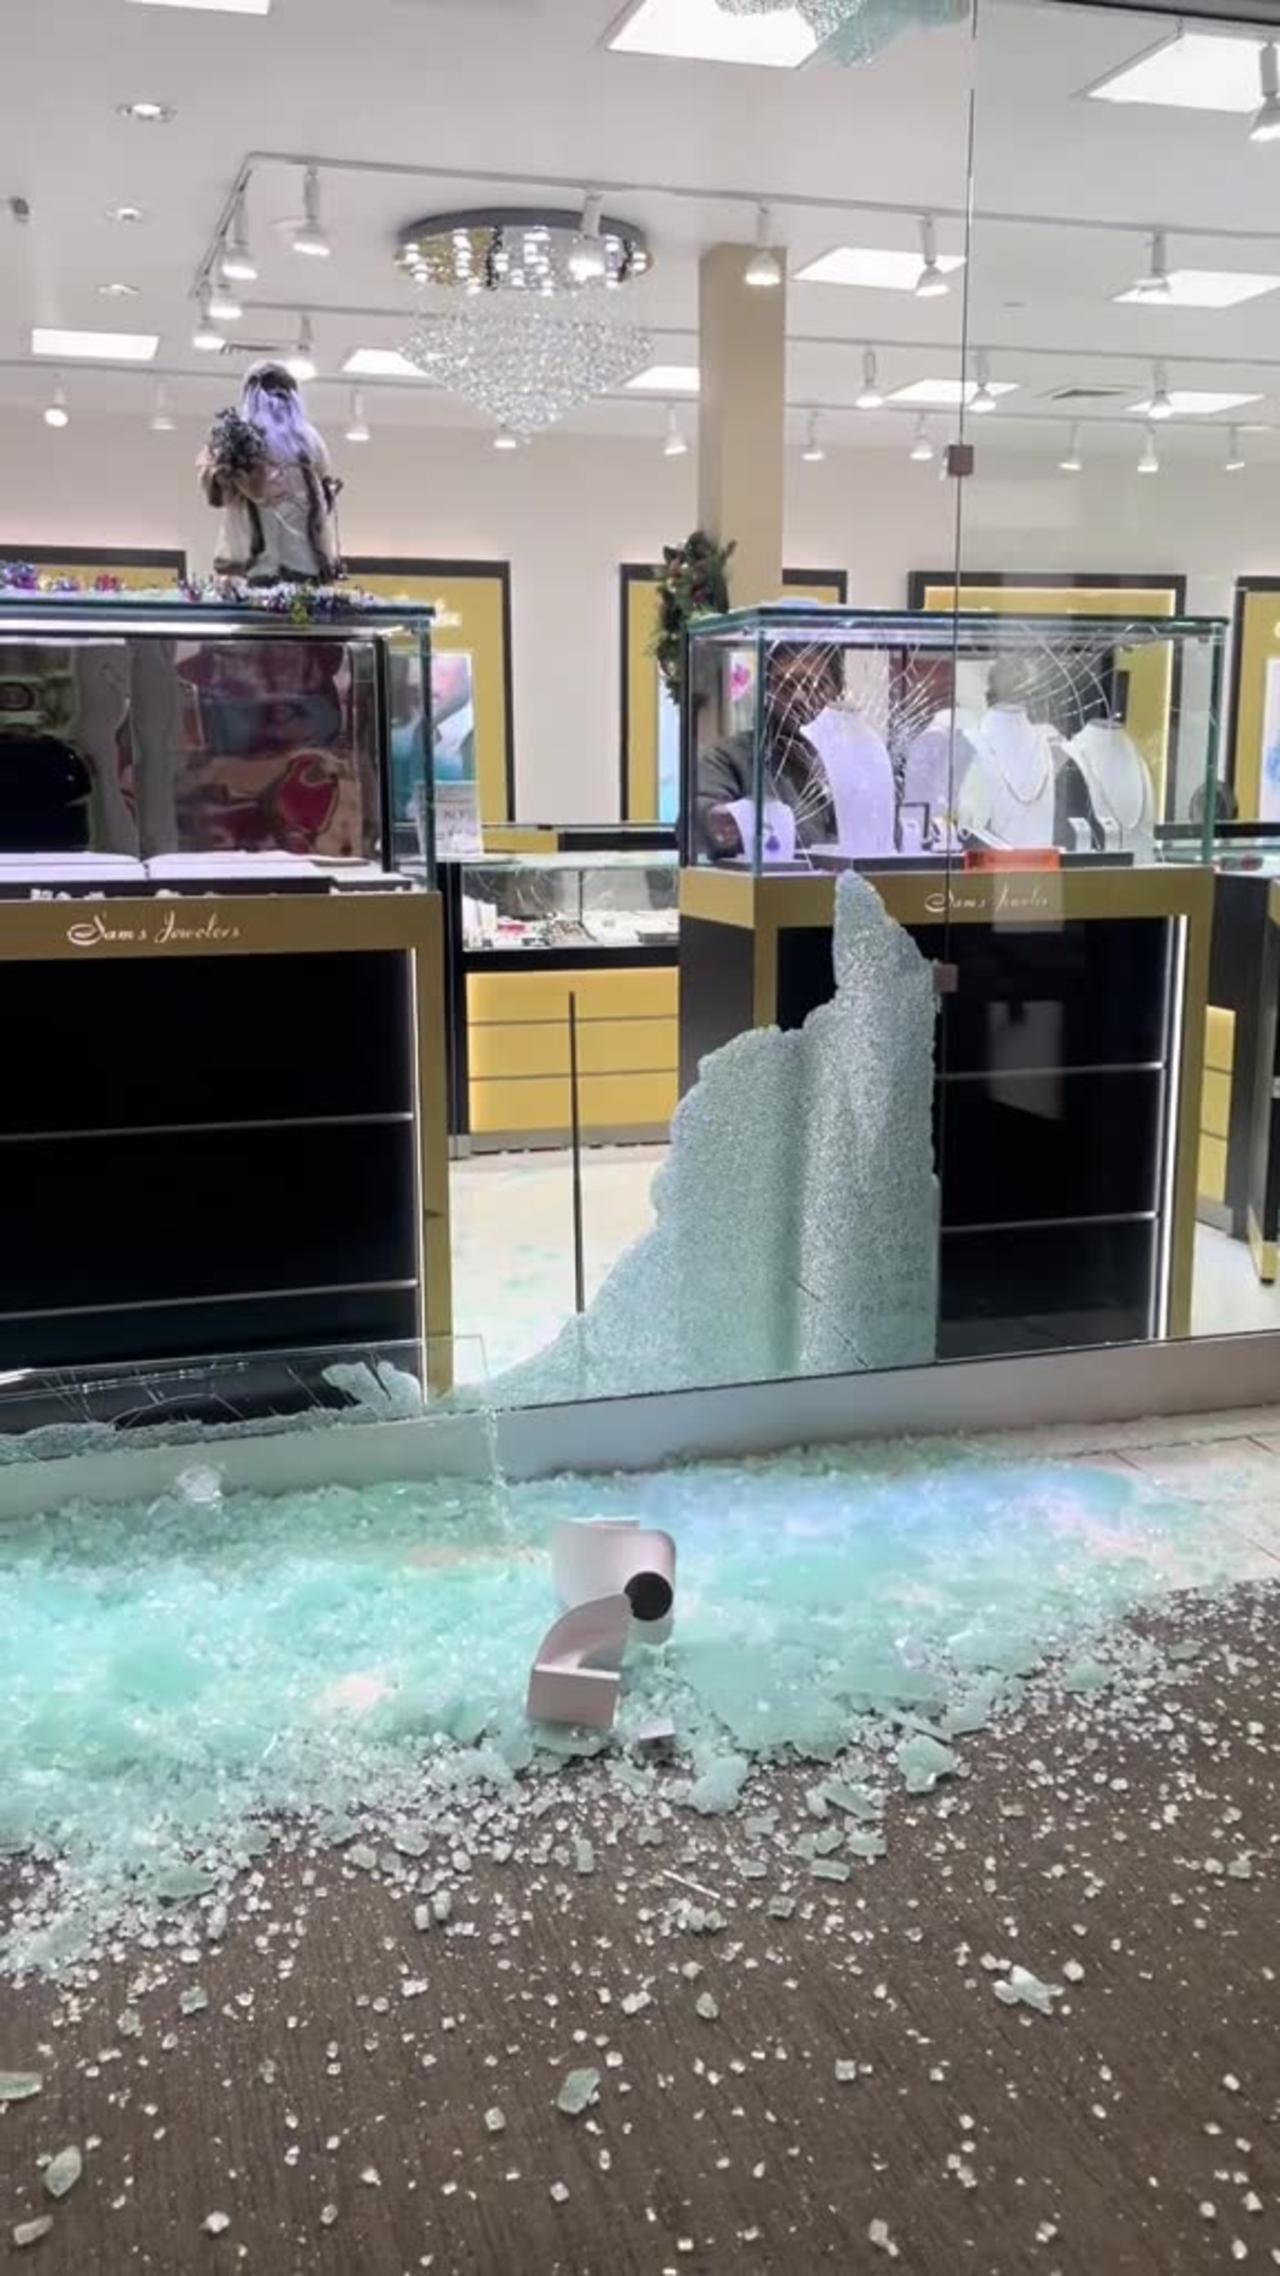 Fairfield, California - smash and grab at Sam’s jewelry store captured on video